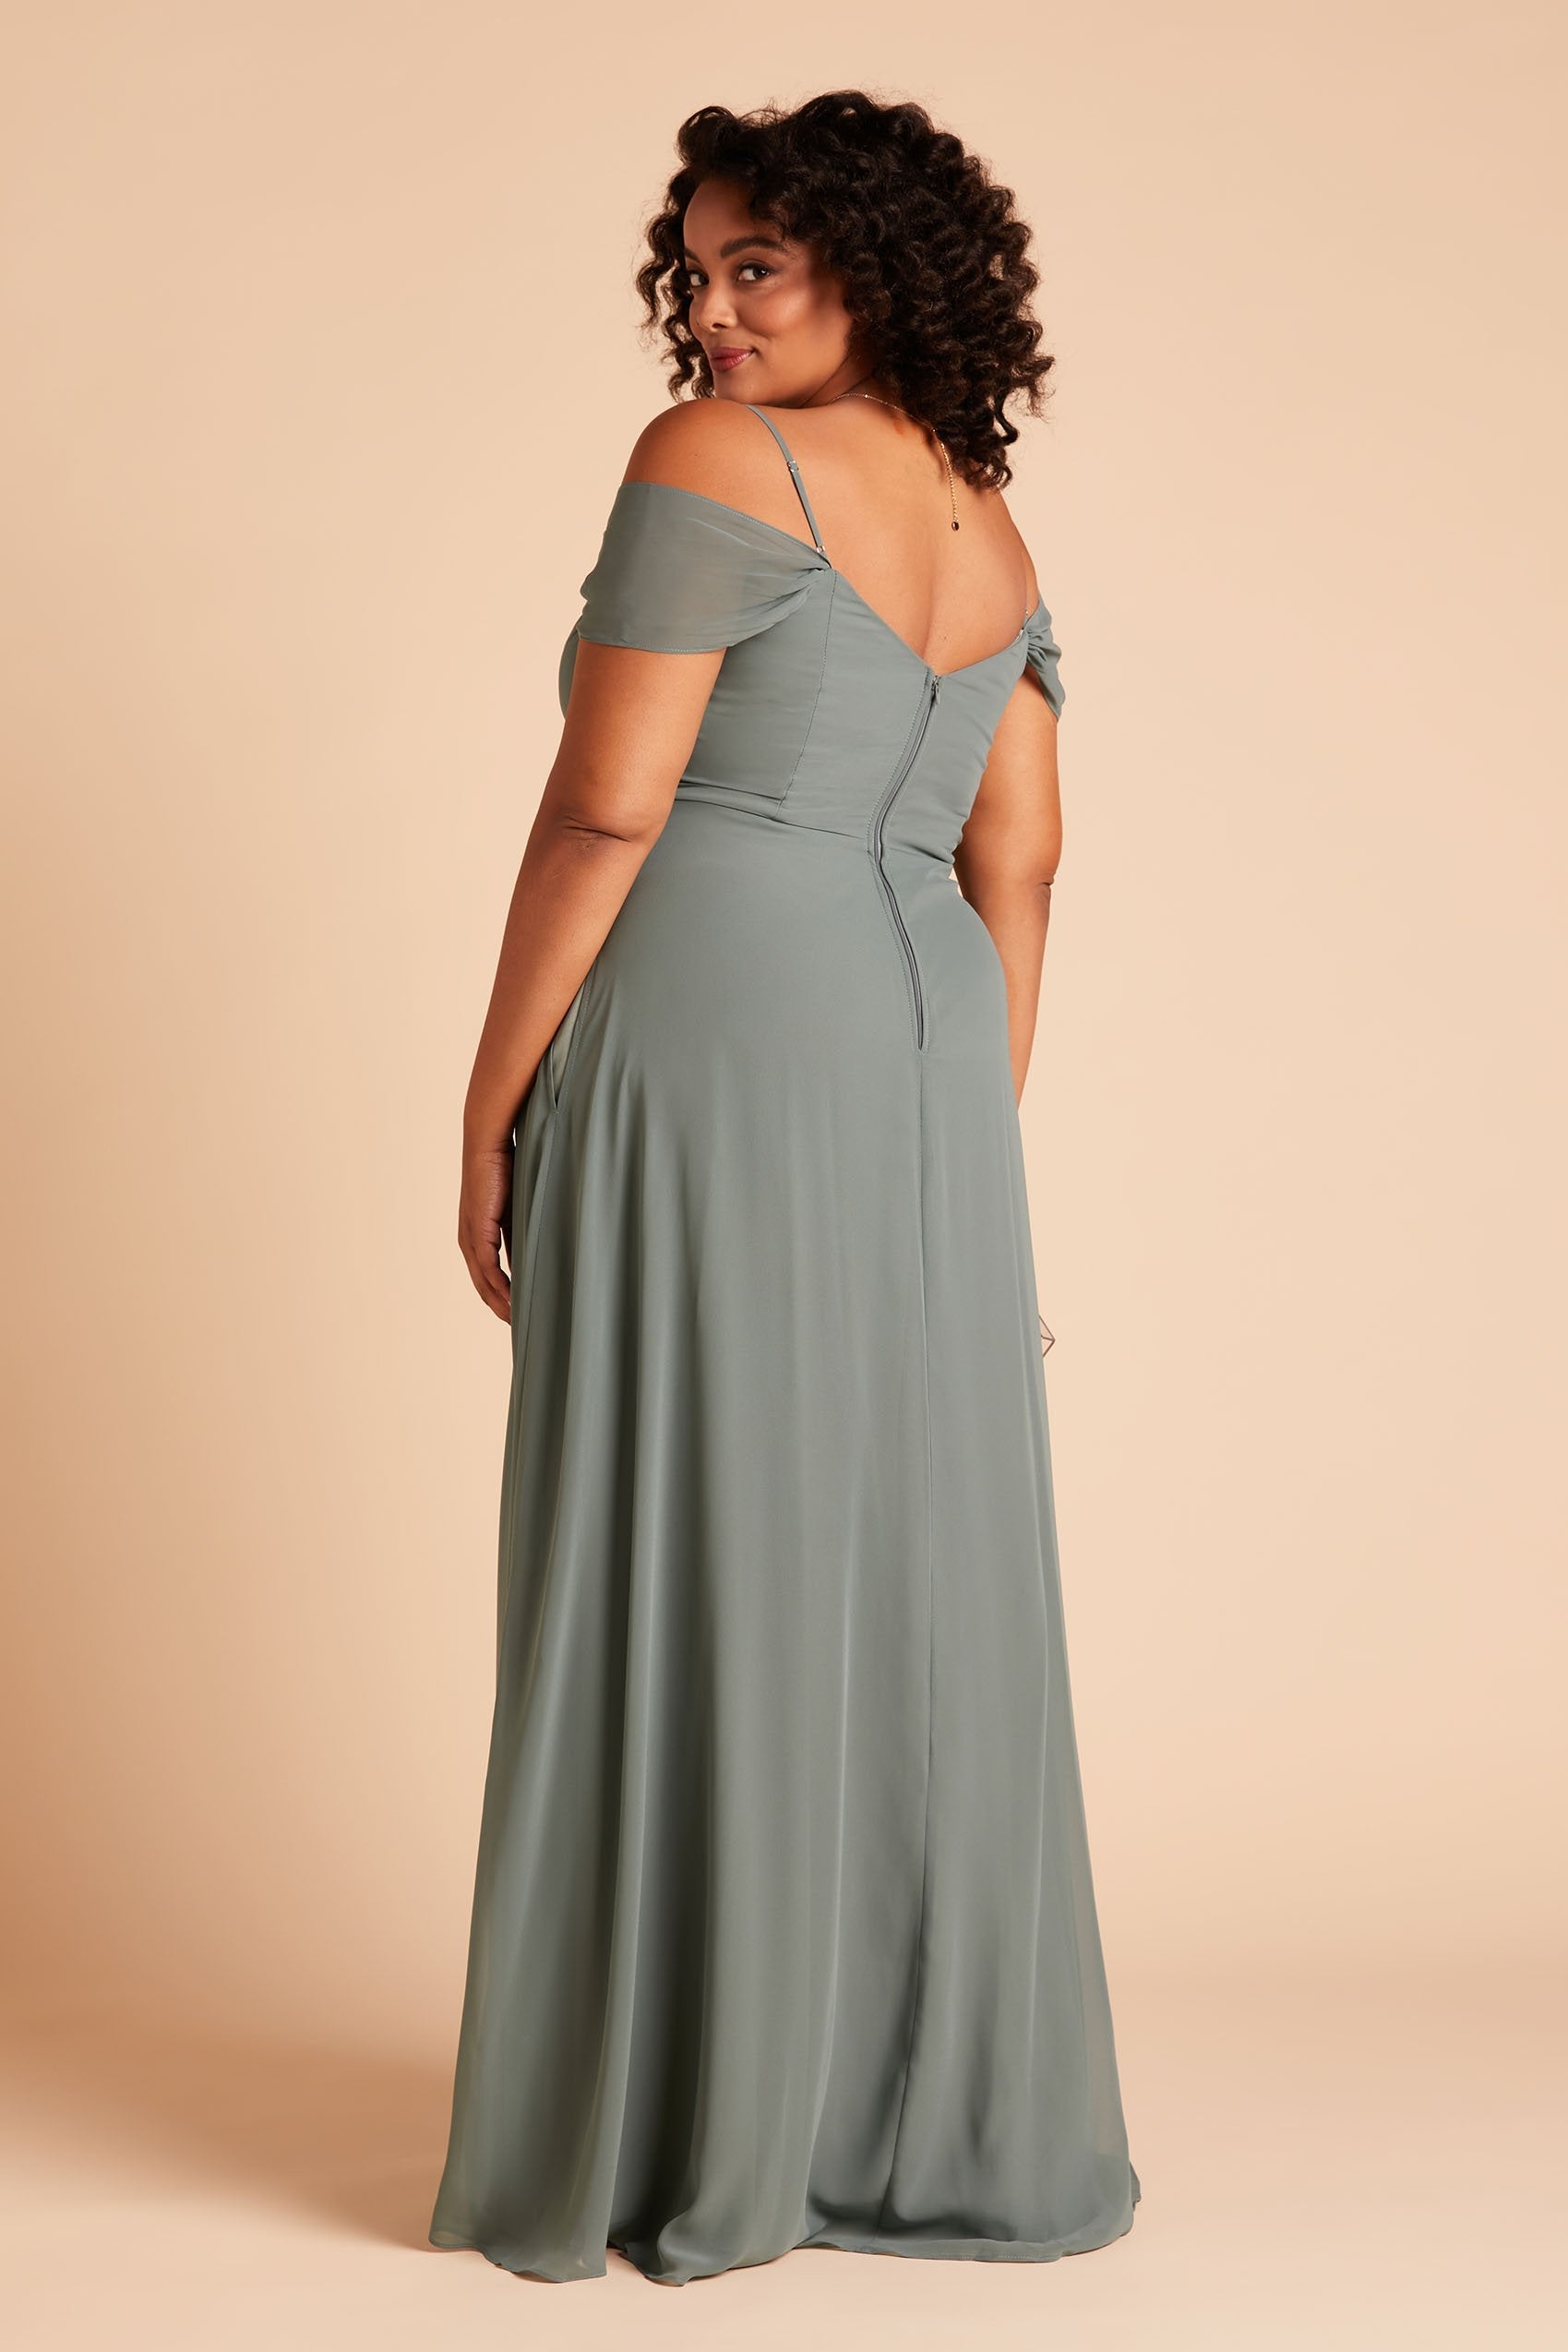 Spence convertible plus size bridesmaid dress in sea glass green chiffon by Birdy Grey, side view